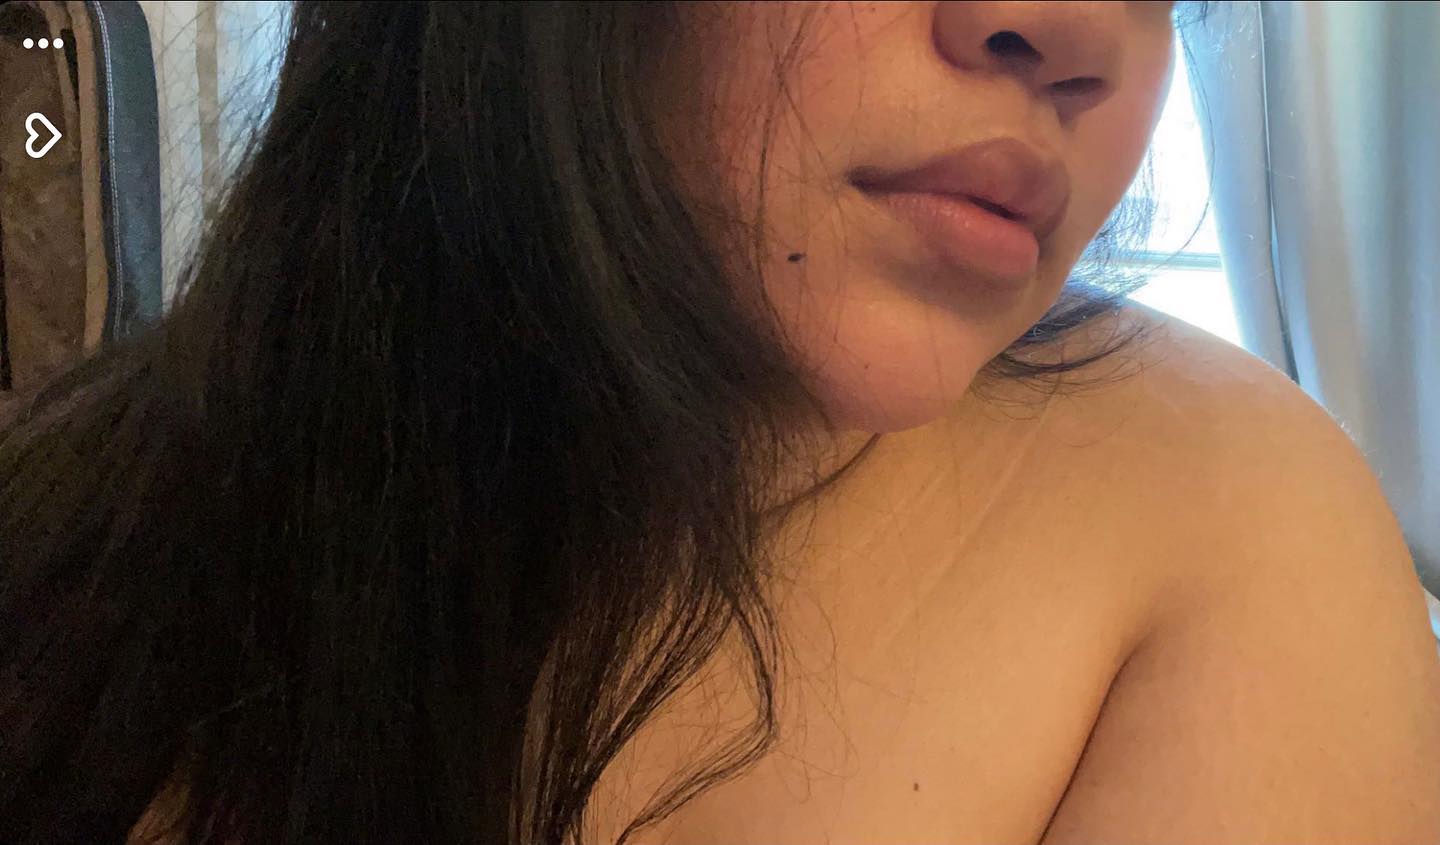 🍰 keep it casual 🍰
🍓I hope today is kind to you🍓

♡
♡
♡
♡
♡
#good #filipina #lip #lipart #bbwlove #bbwadmirer #thickasian #bodypositive #soft #gentle #asianbbw #allnatural #bareface #nomakeup #nomakeupselfie #nofilterneeded #mixed #blasian #blasiangirls